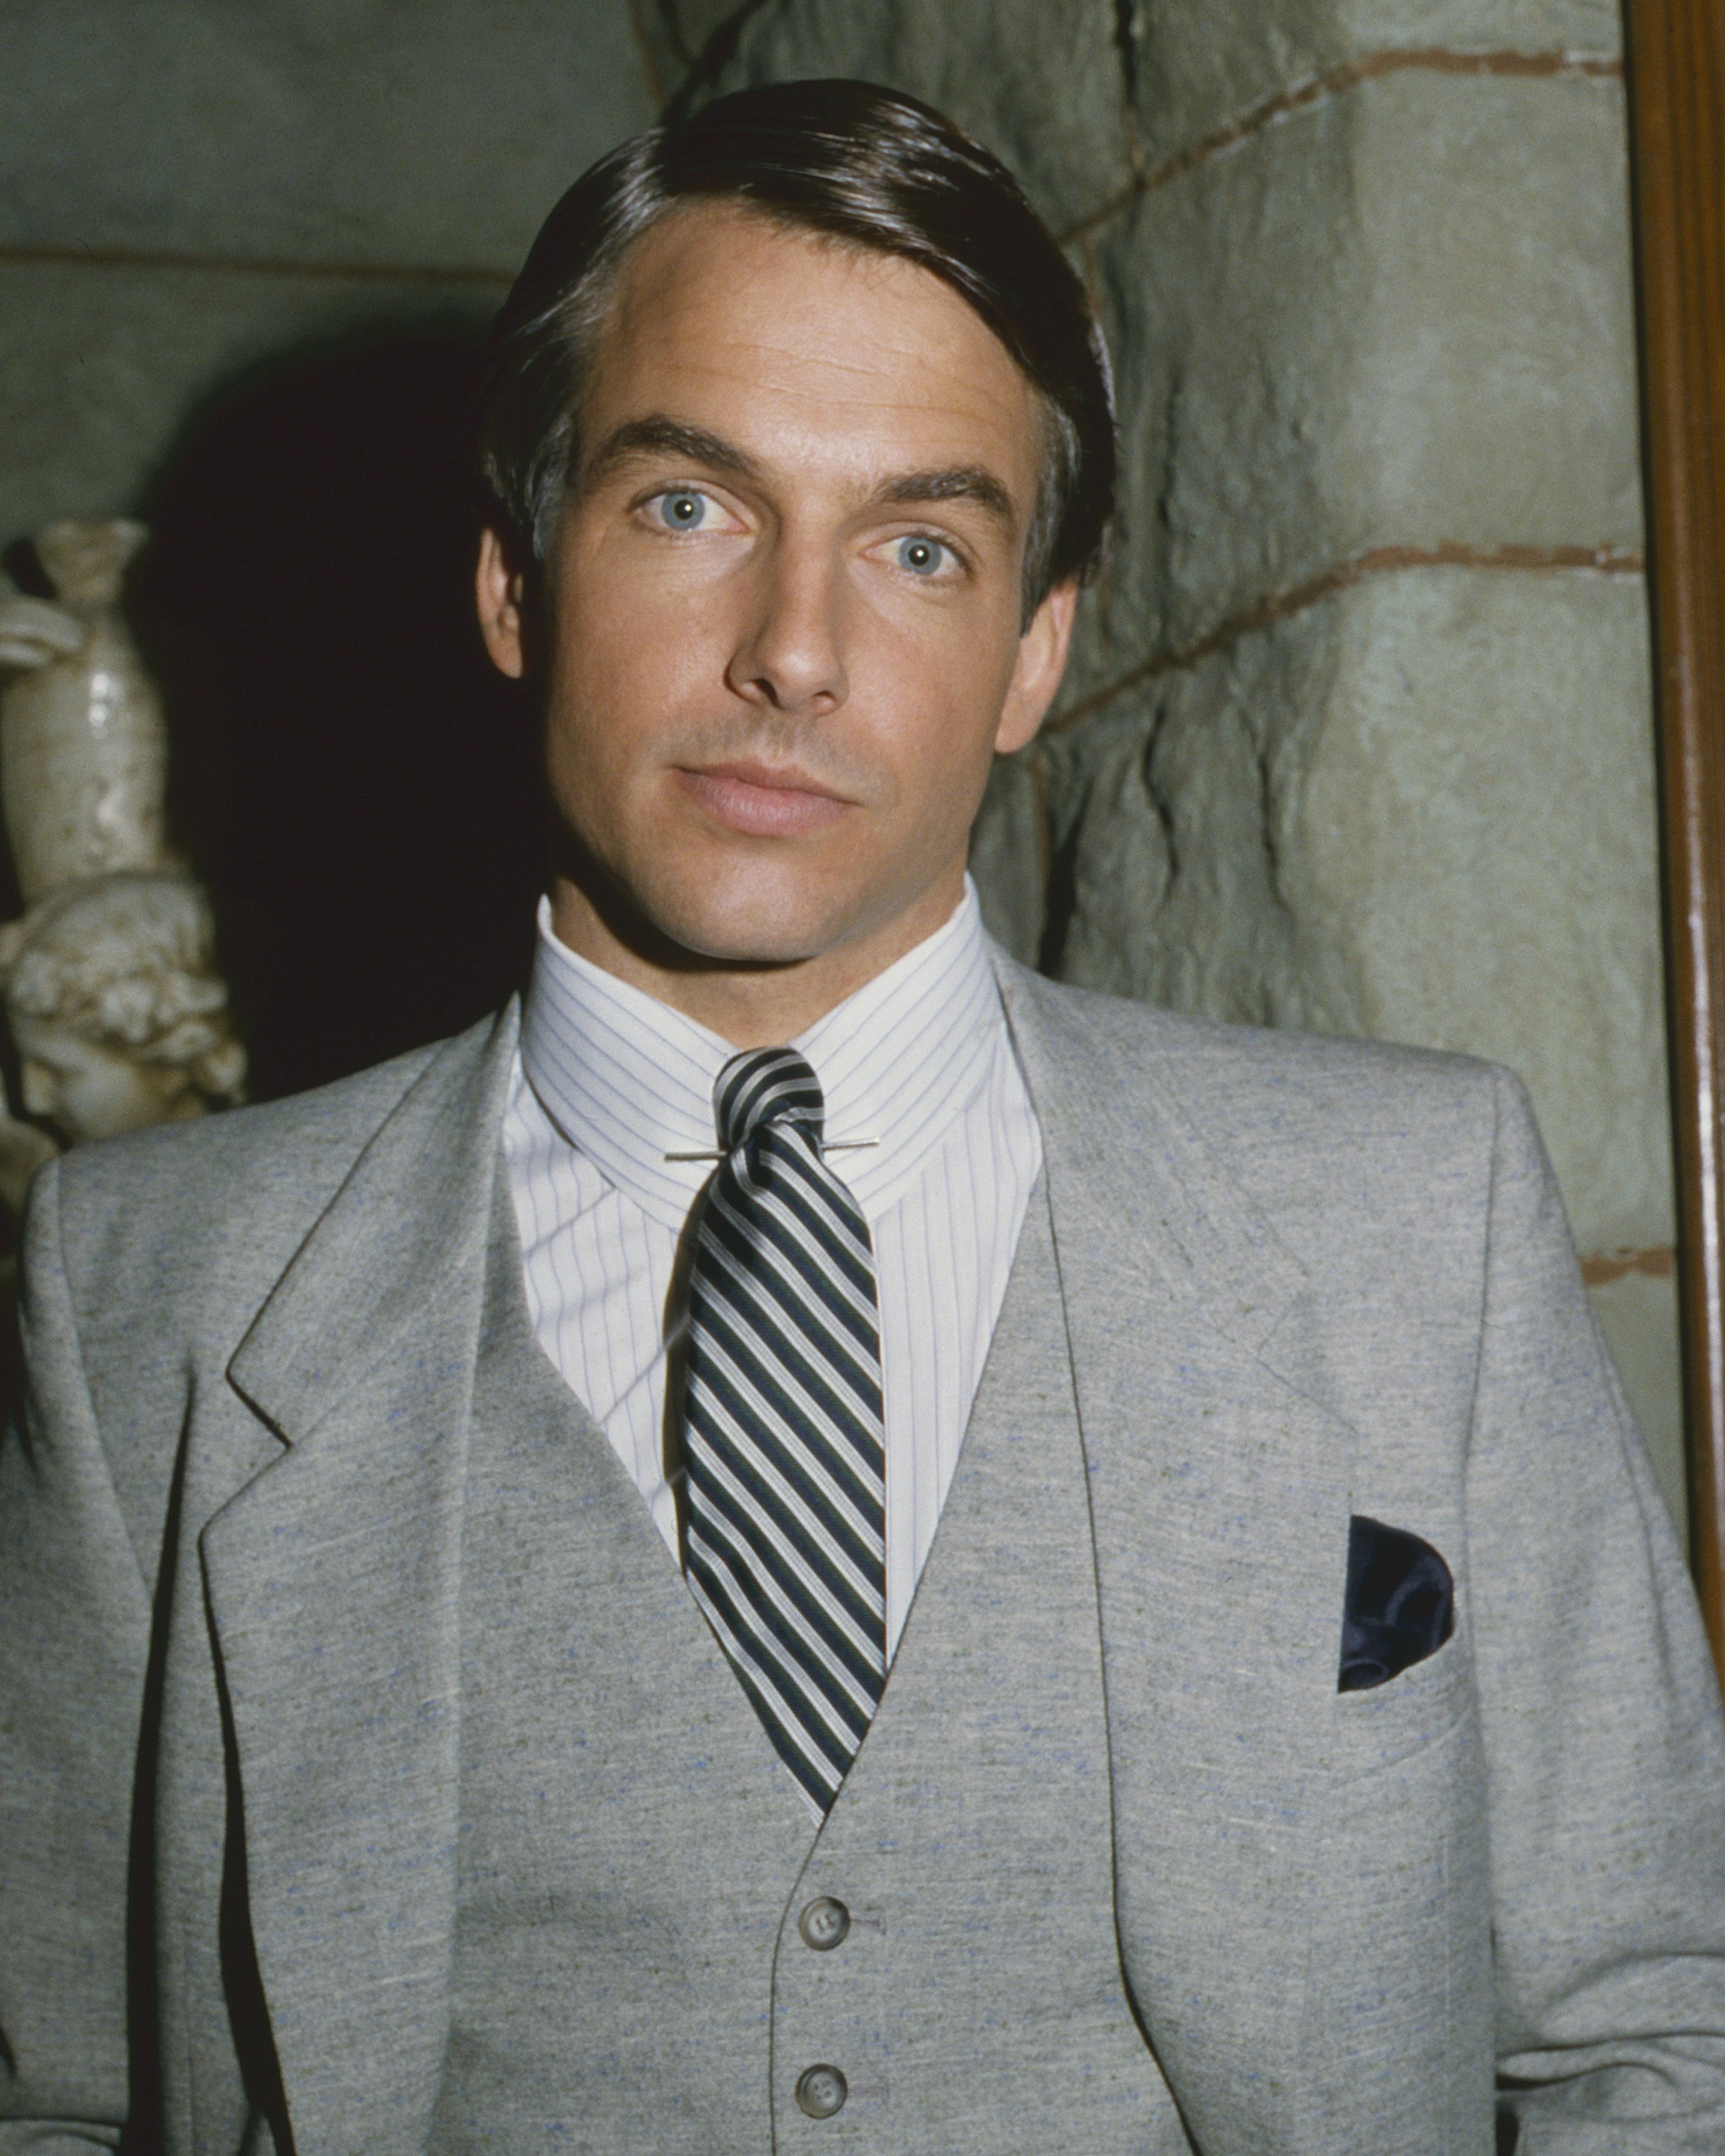 Portrait of American actor Mark Harmon on the television show 'Flamingo Road,' Burbank, California, February 9, 1982. |  Photo: Getty Images